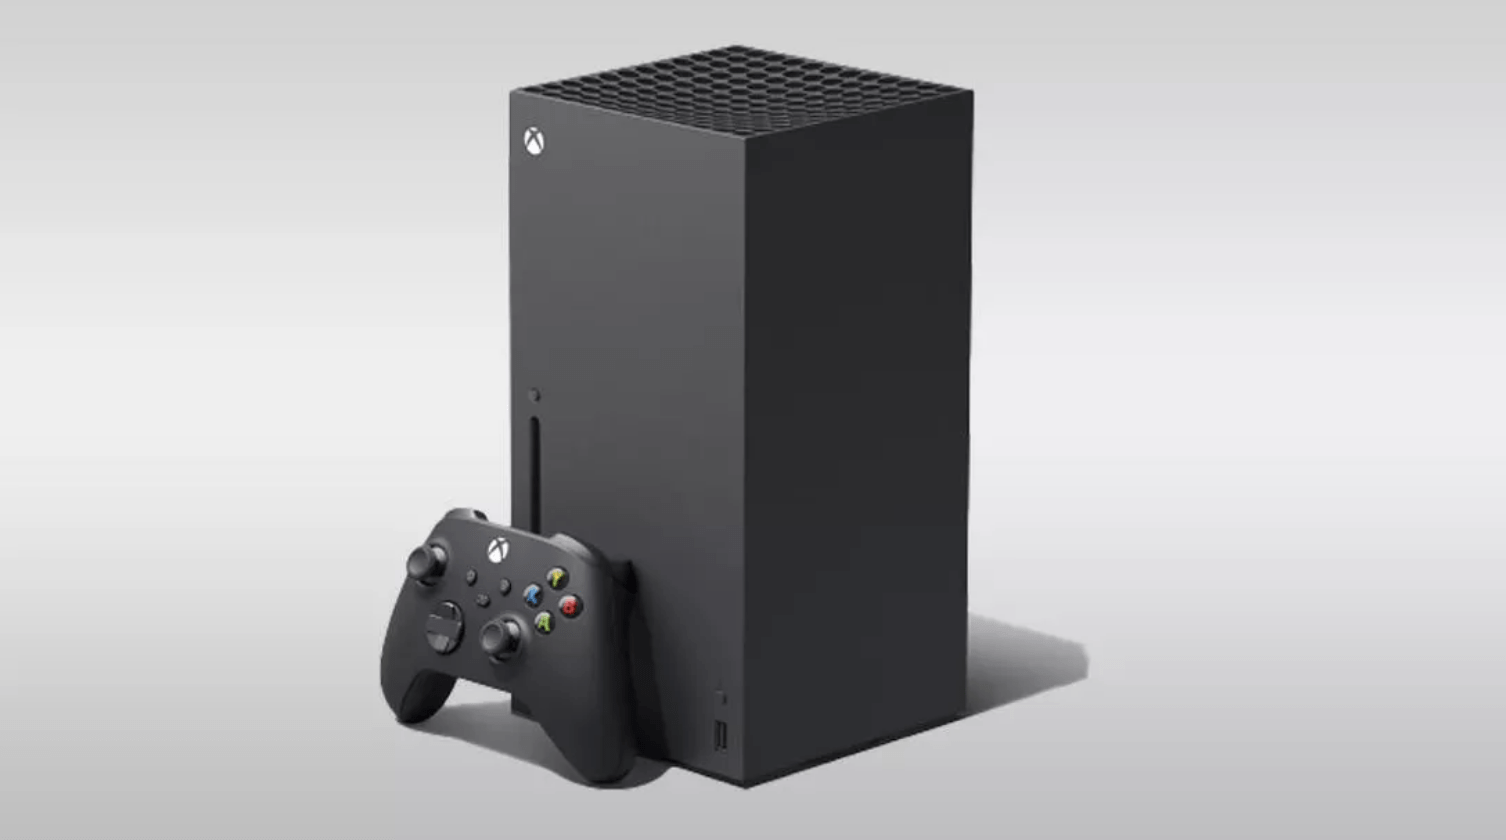 Best Buy Just Restocked Xbox Series X Consoles and I’m Getting One Now